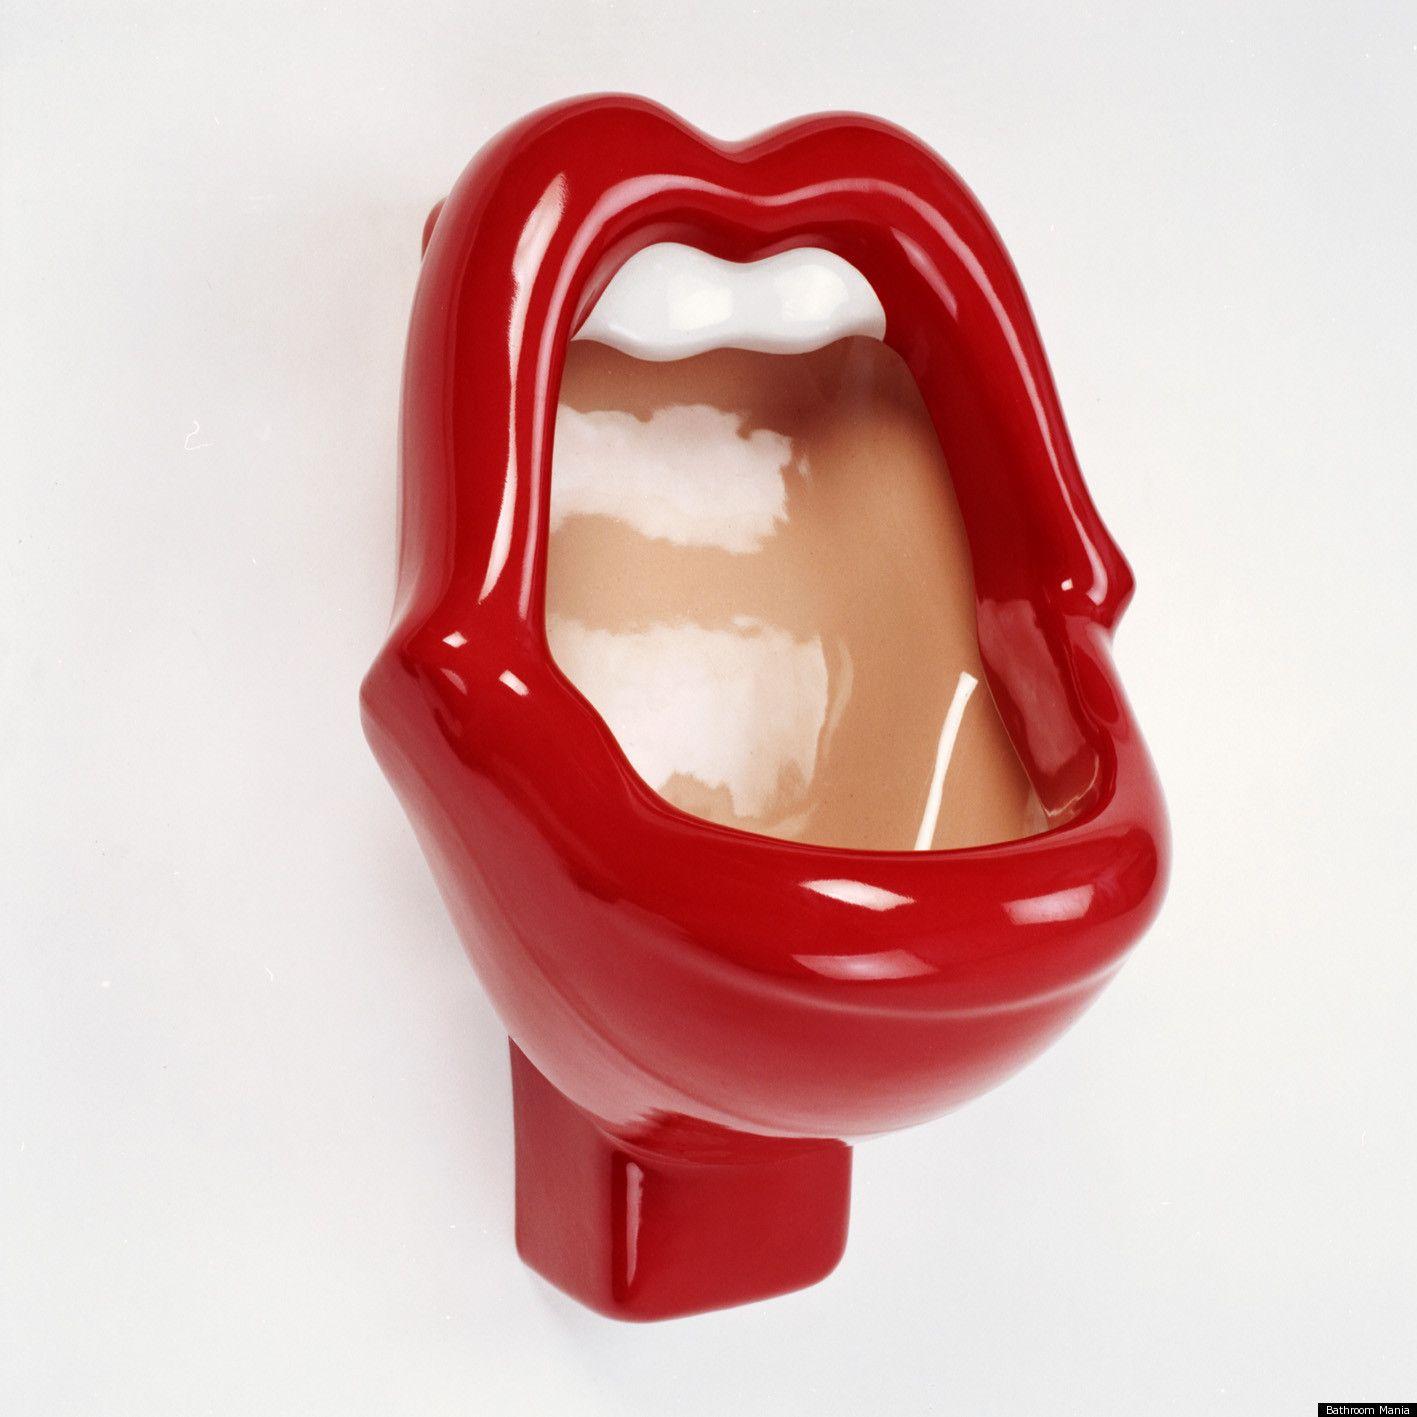 Hot Red Lips and Tongue Logo - Rolling Stone Mouth Shaped Urinals Called Sexist (PHOTOS)